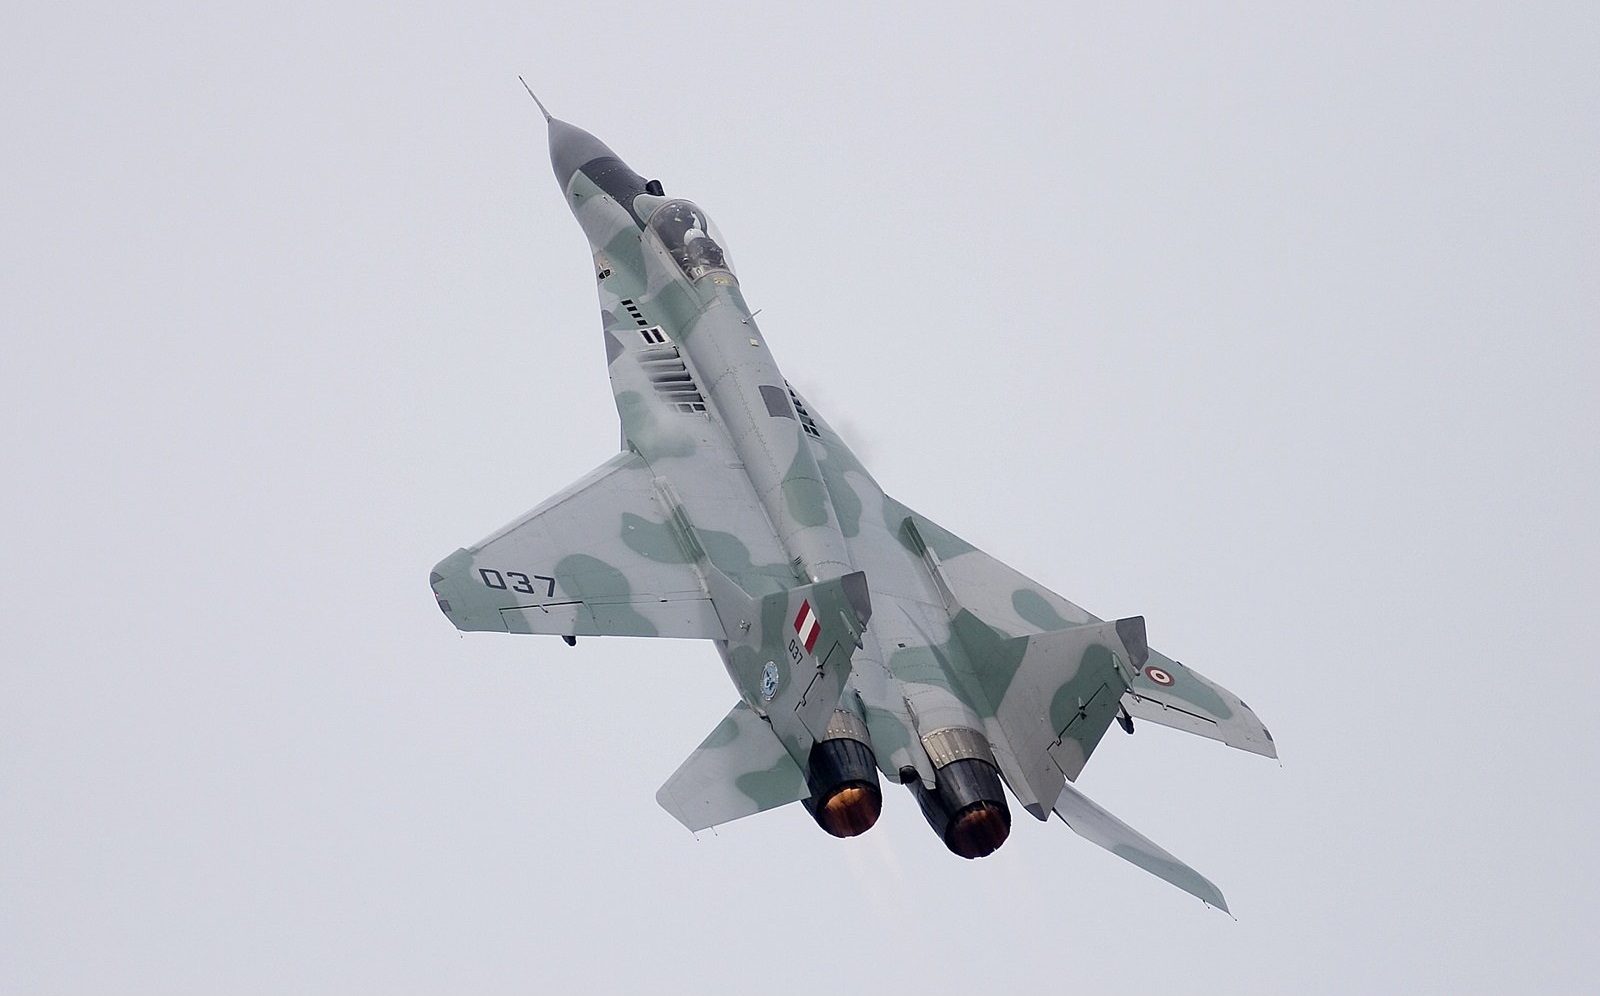 HQ Mikoyan MiG-29 Wallpapers | File 190.41Kb